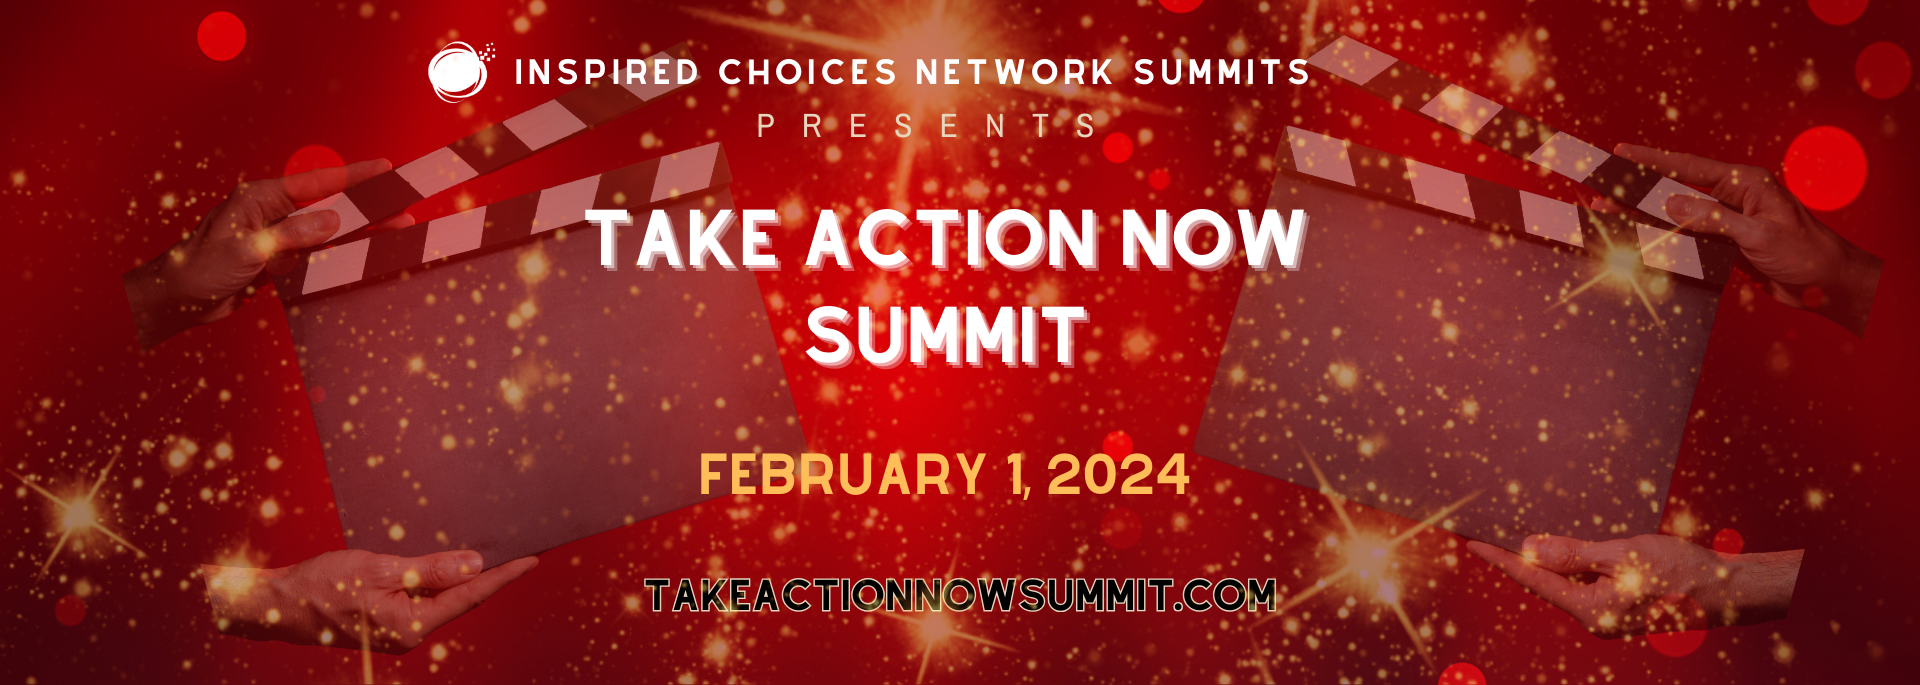 Take Action Now Summit